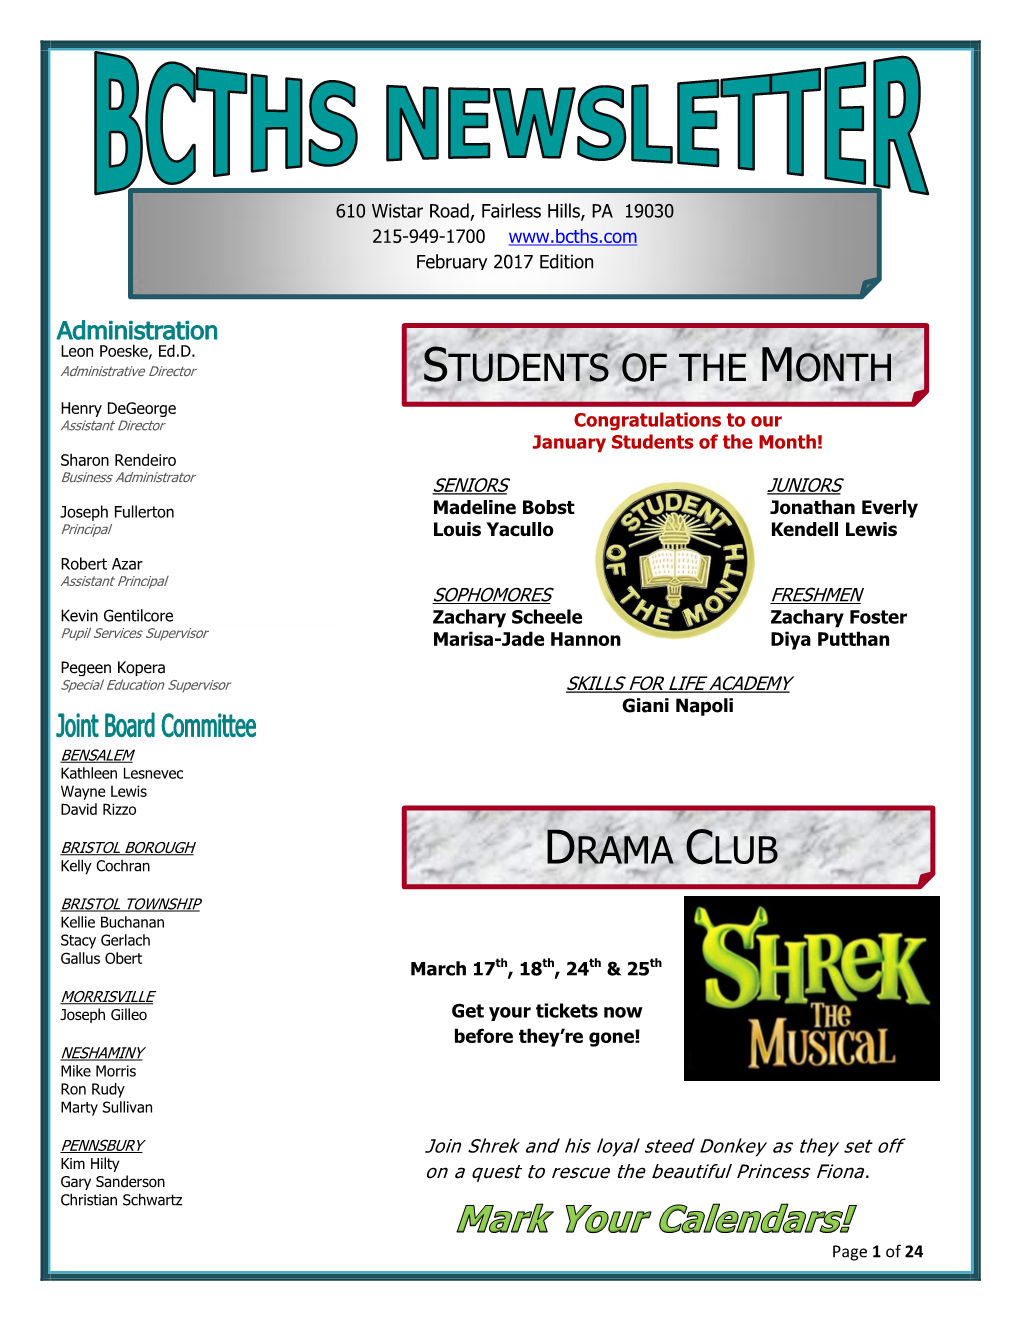 Students of the Month Drama Club